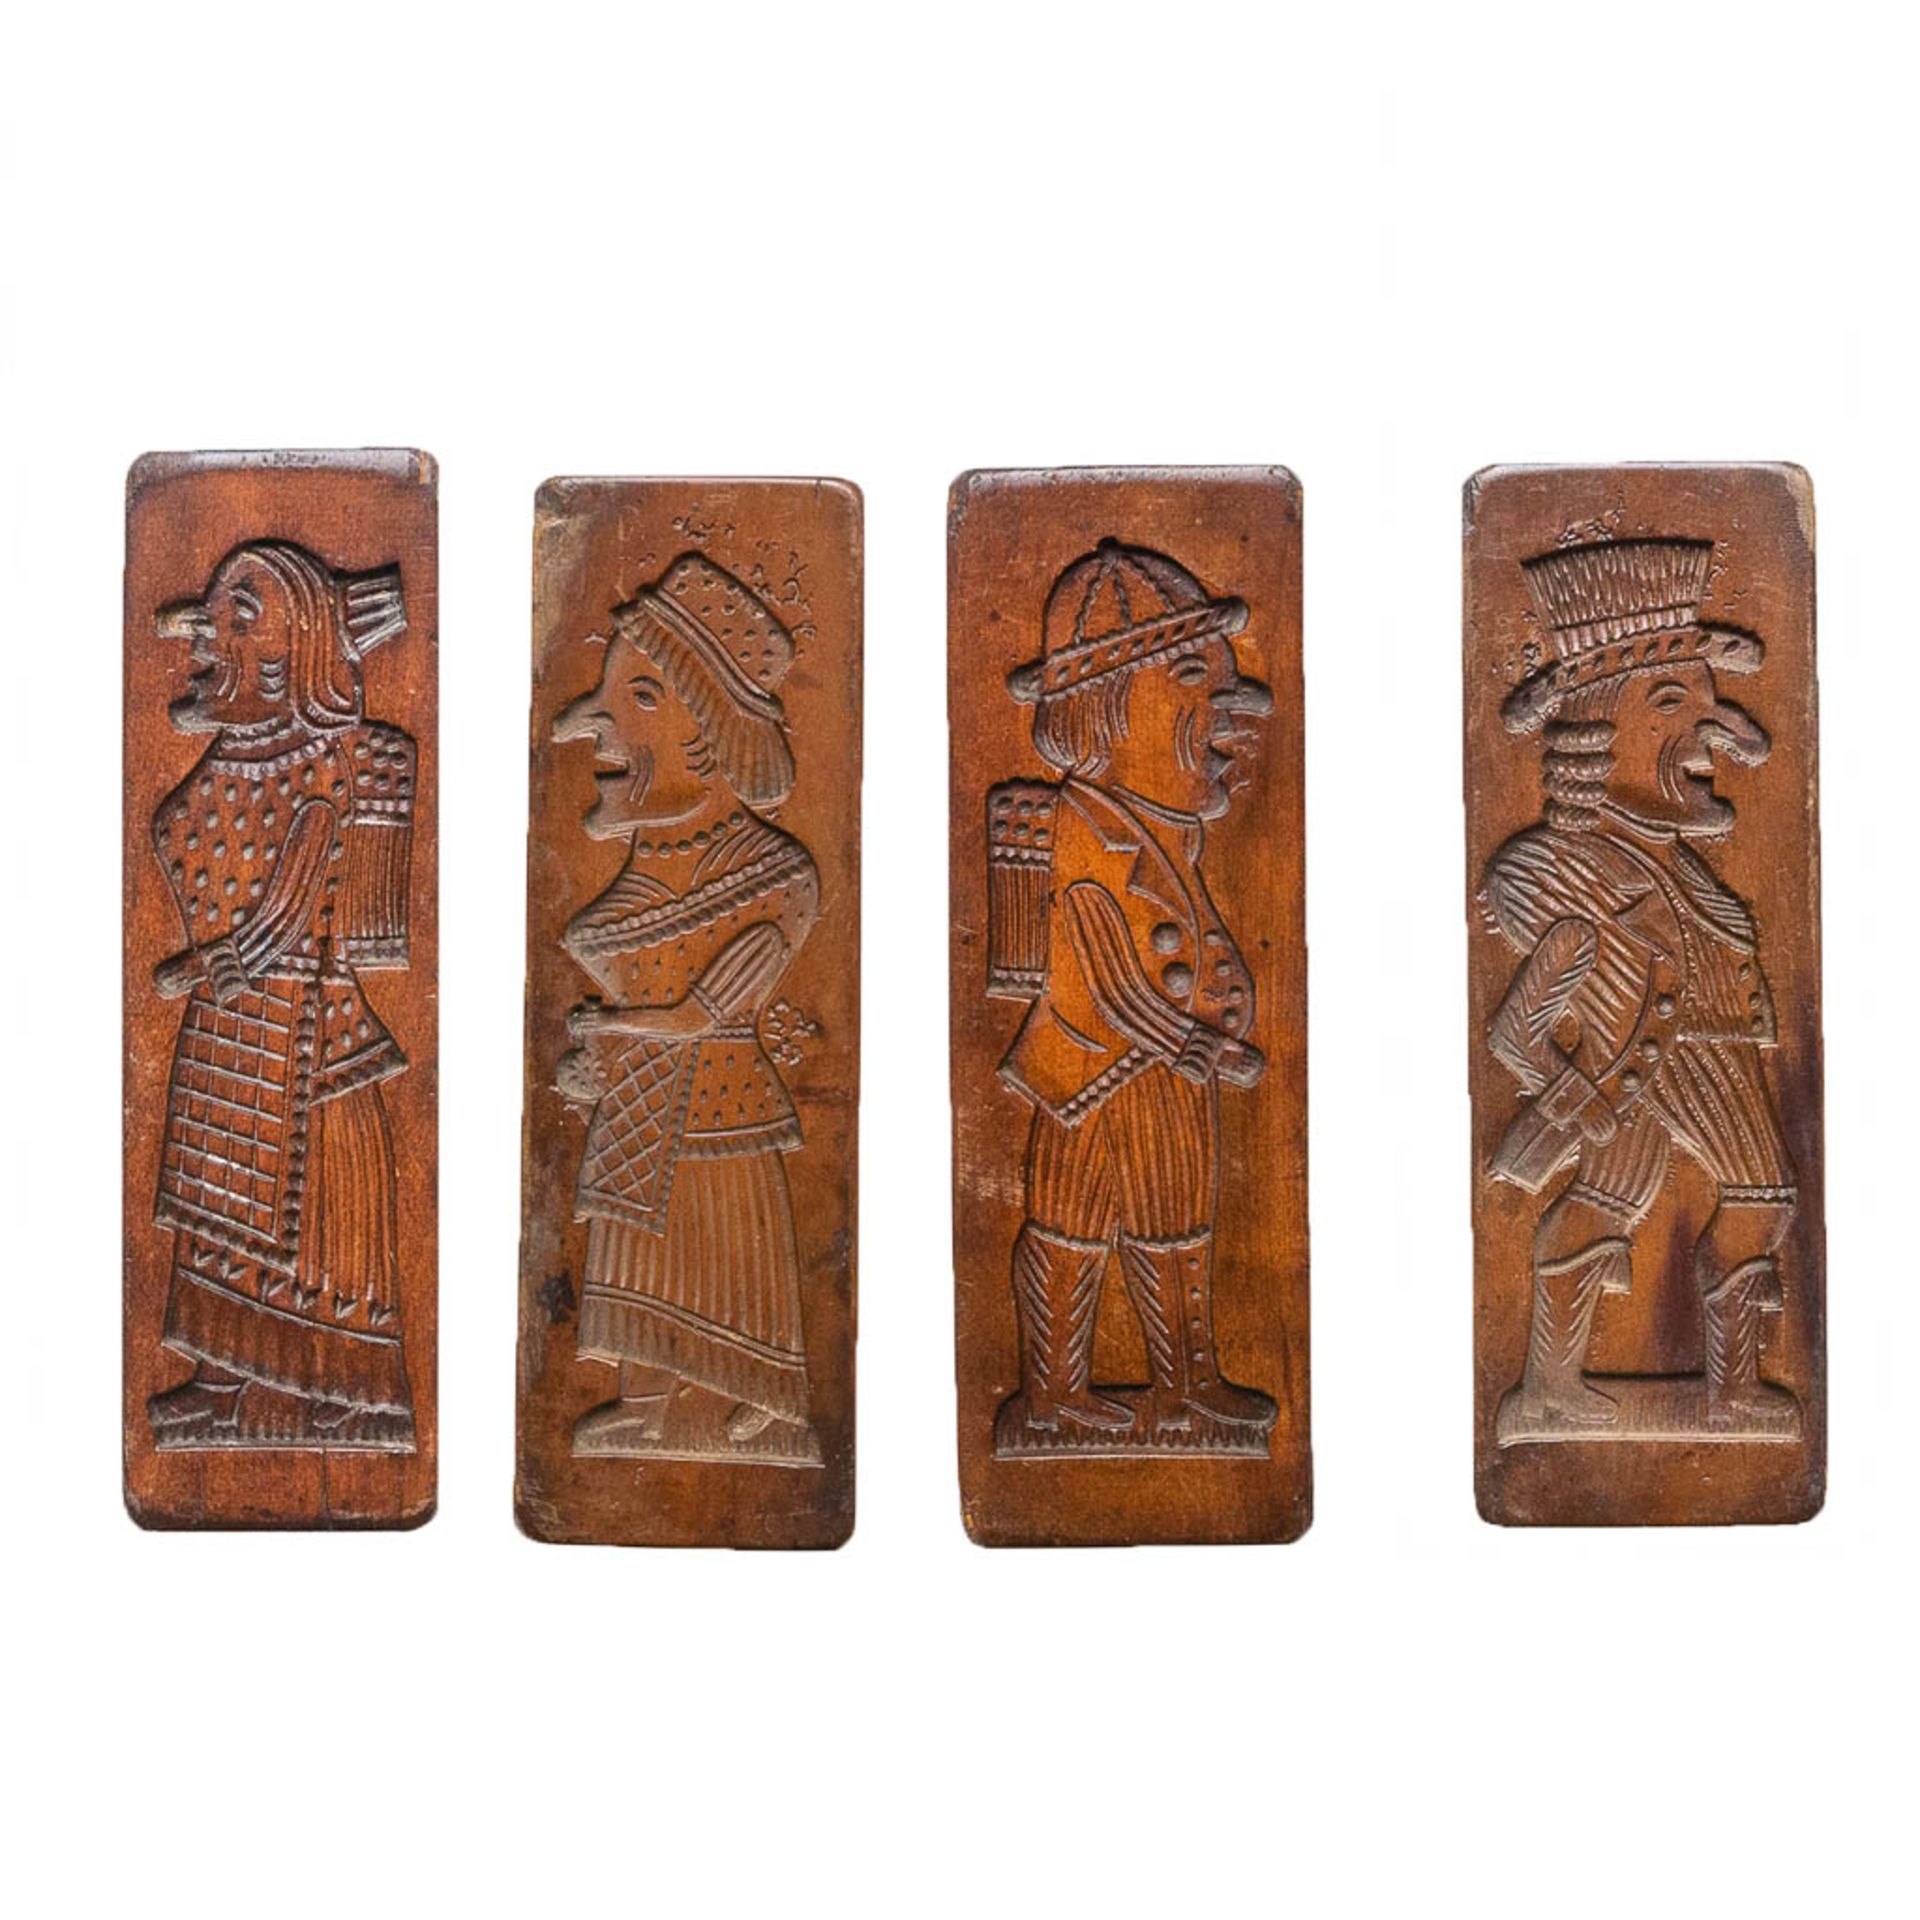 A collection of 4 wood cookies or gingerbread moulds/molds. - Image 2 of 9